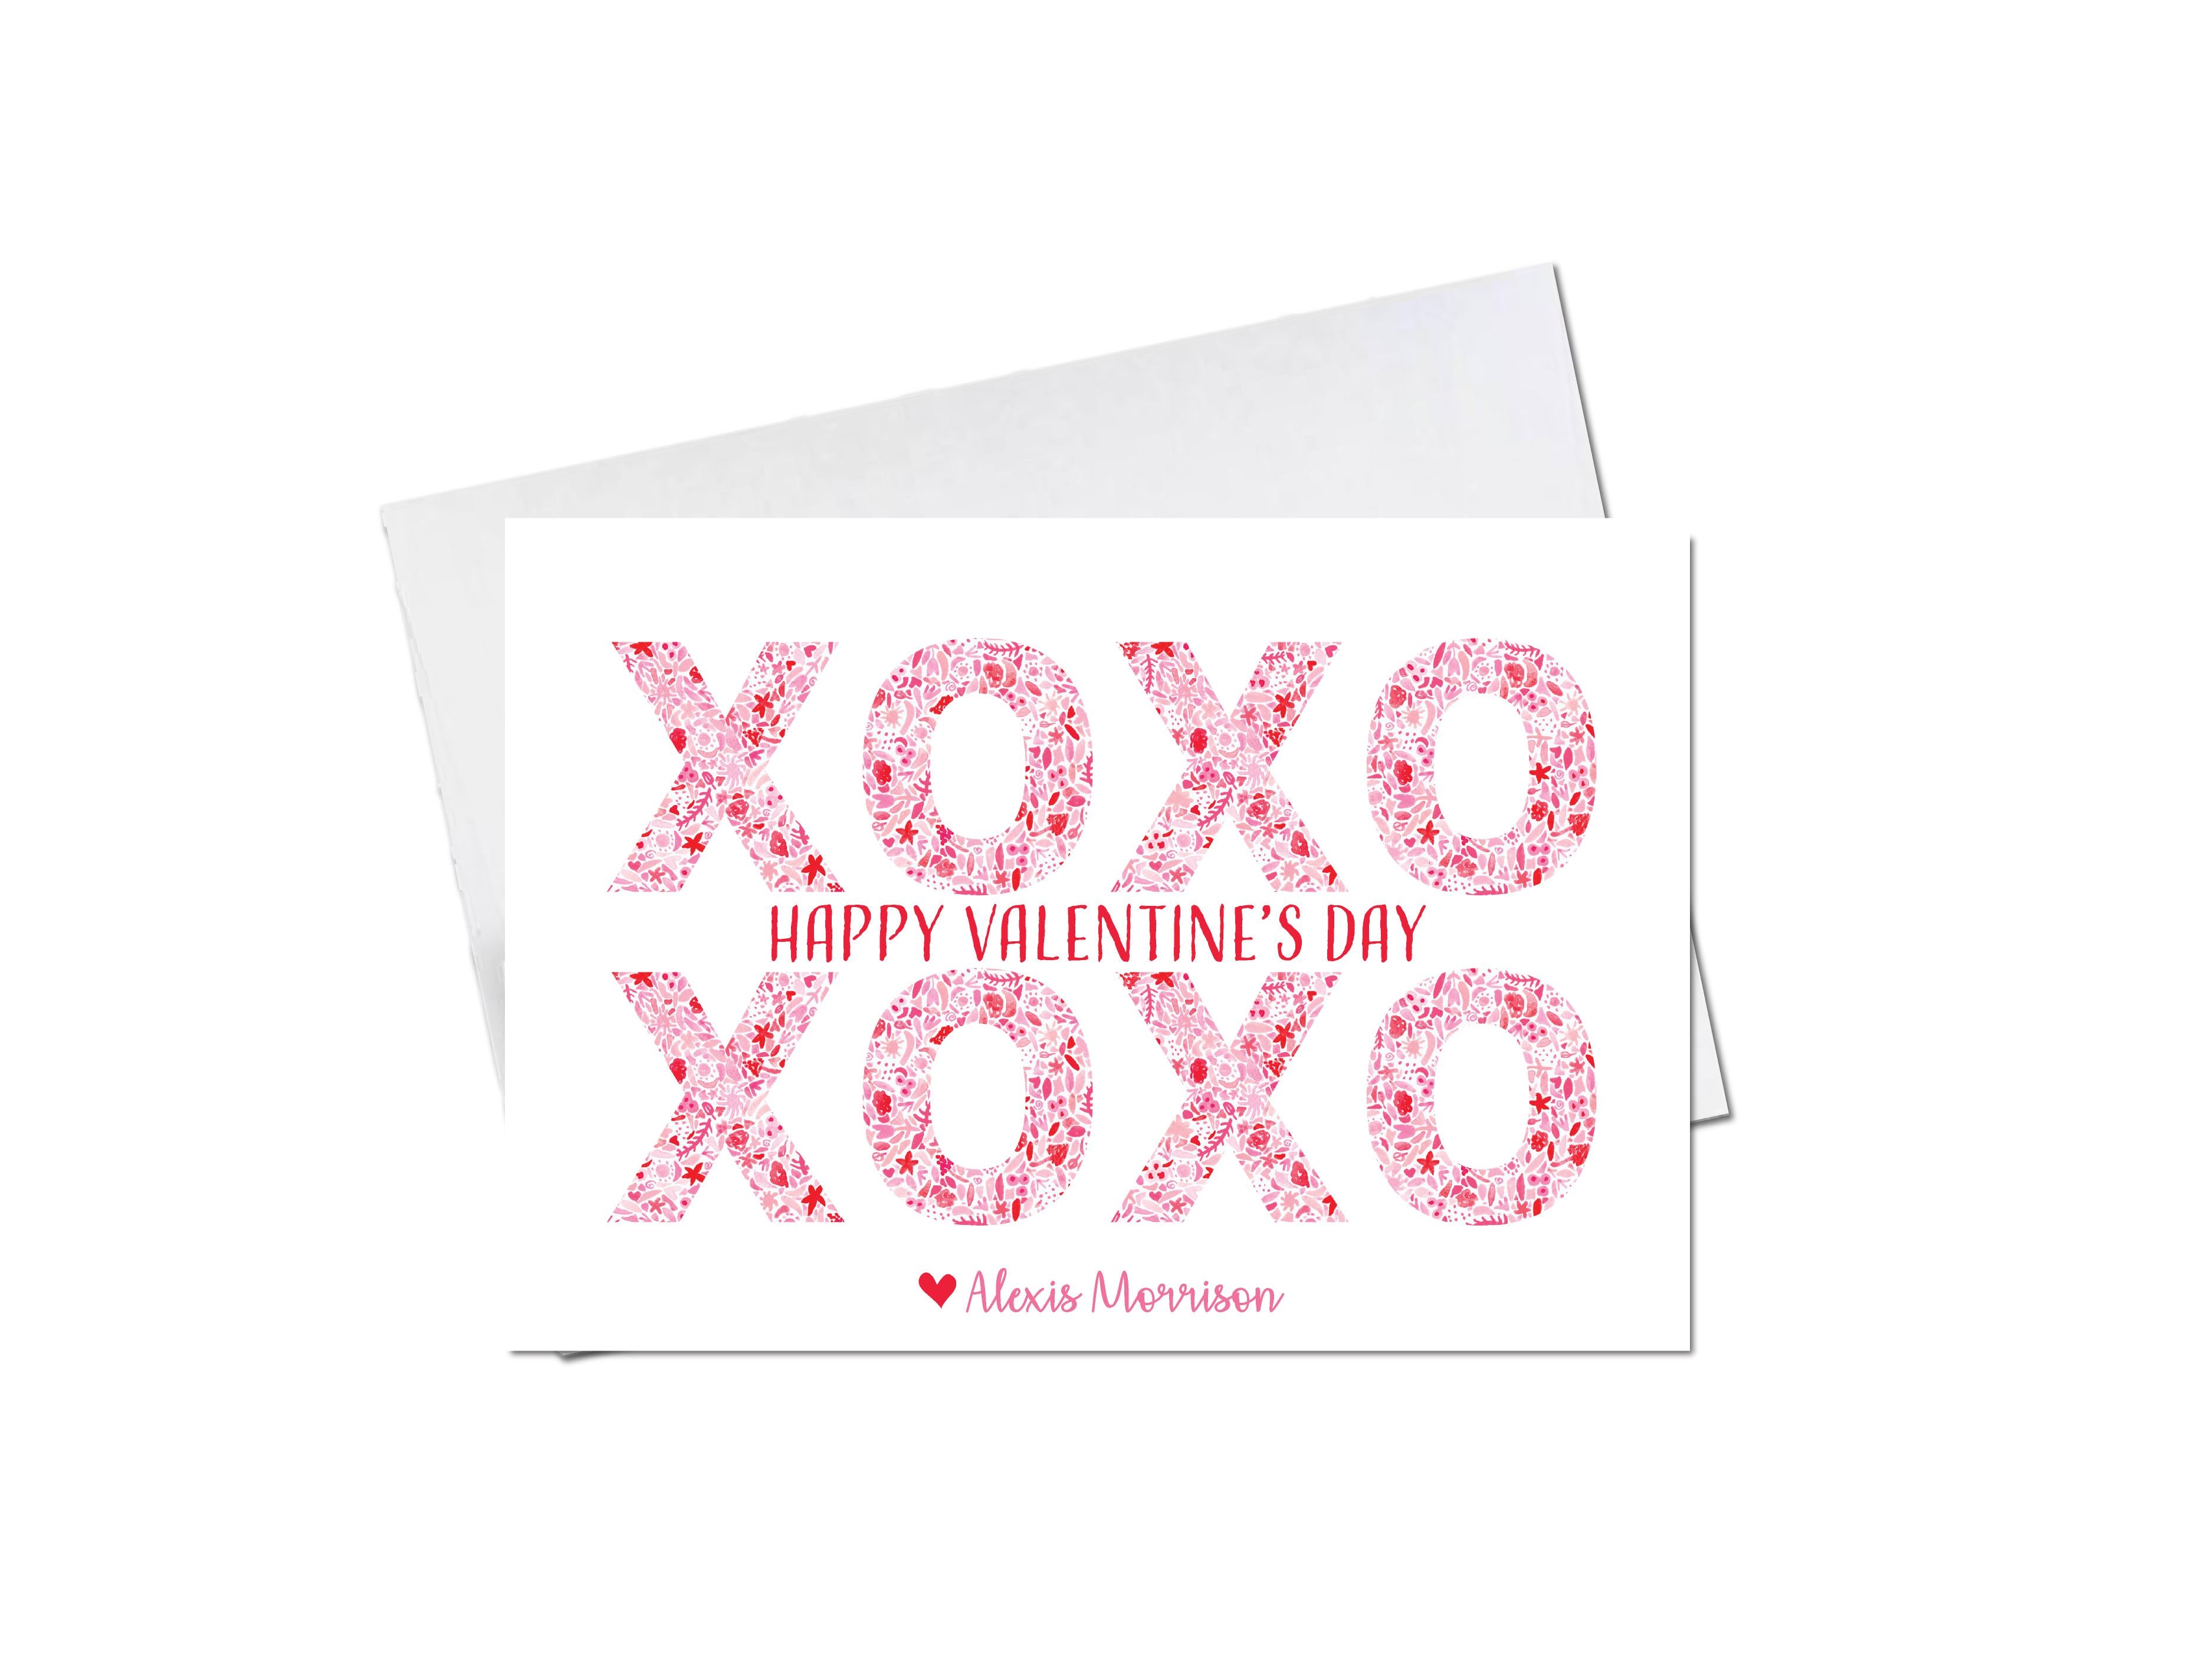 XOXO Pink and Red Pattern Valentine's Day Cards-These personalized flat notecards are 3.5" x 4.875 and feature our hand-painted watercolor xoxo, printed in the USA on 120lb textured stock. They come with white envelopes and make great Valentine's Day cards for kids.-The Singing Little Bird